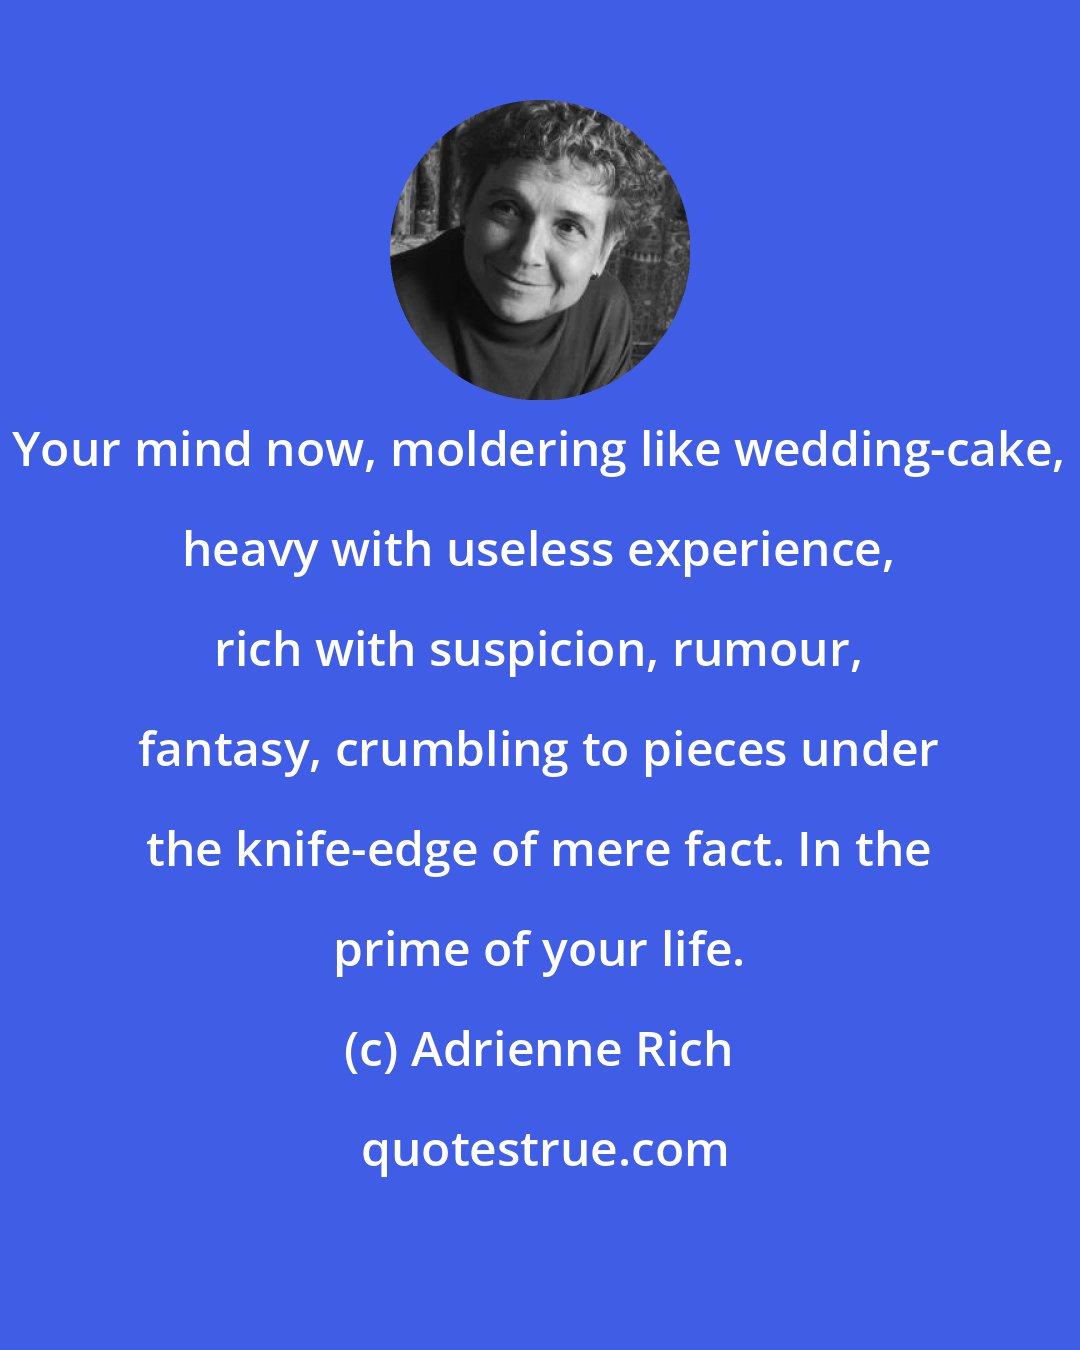 Adrienne Rich: Your mind now, moldering like wedding-cake, heavy with useless experience, rich with suspicion, rumour, fantasy, crumbling to pieces under the knife-edge of mere fact. In the prime of your life.